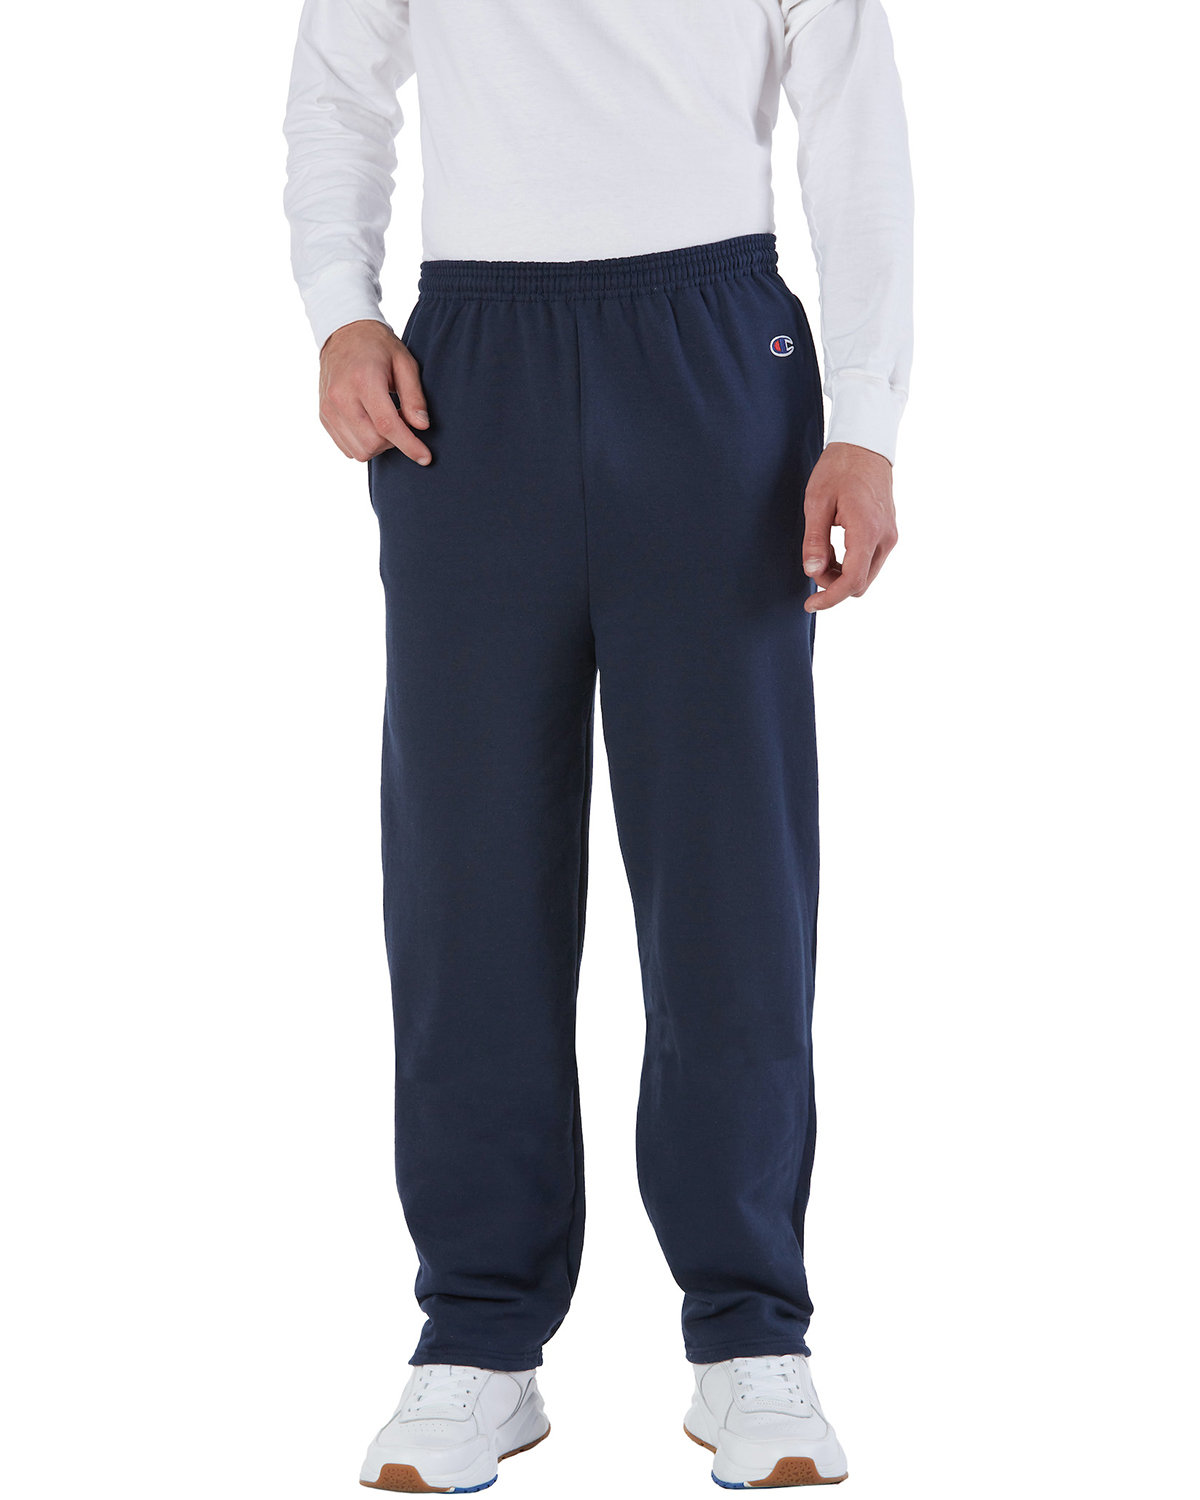  Powerblend, Fleece, Warm And Comfortable Joggers